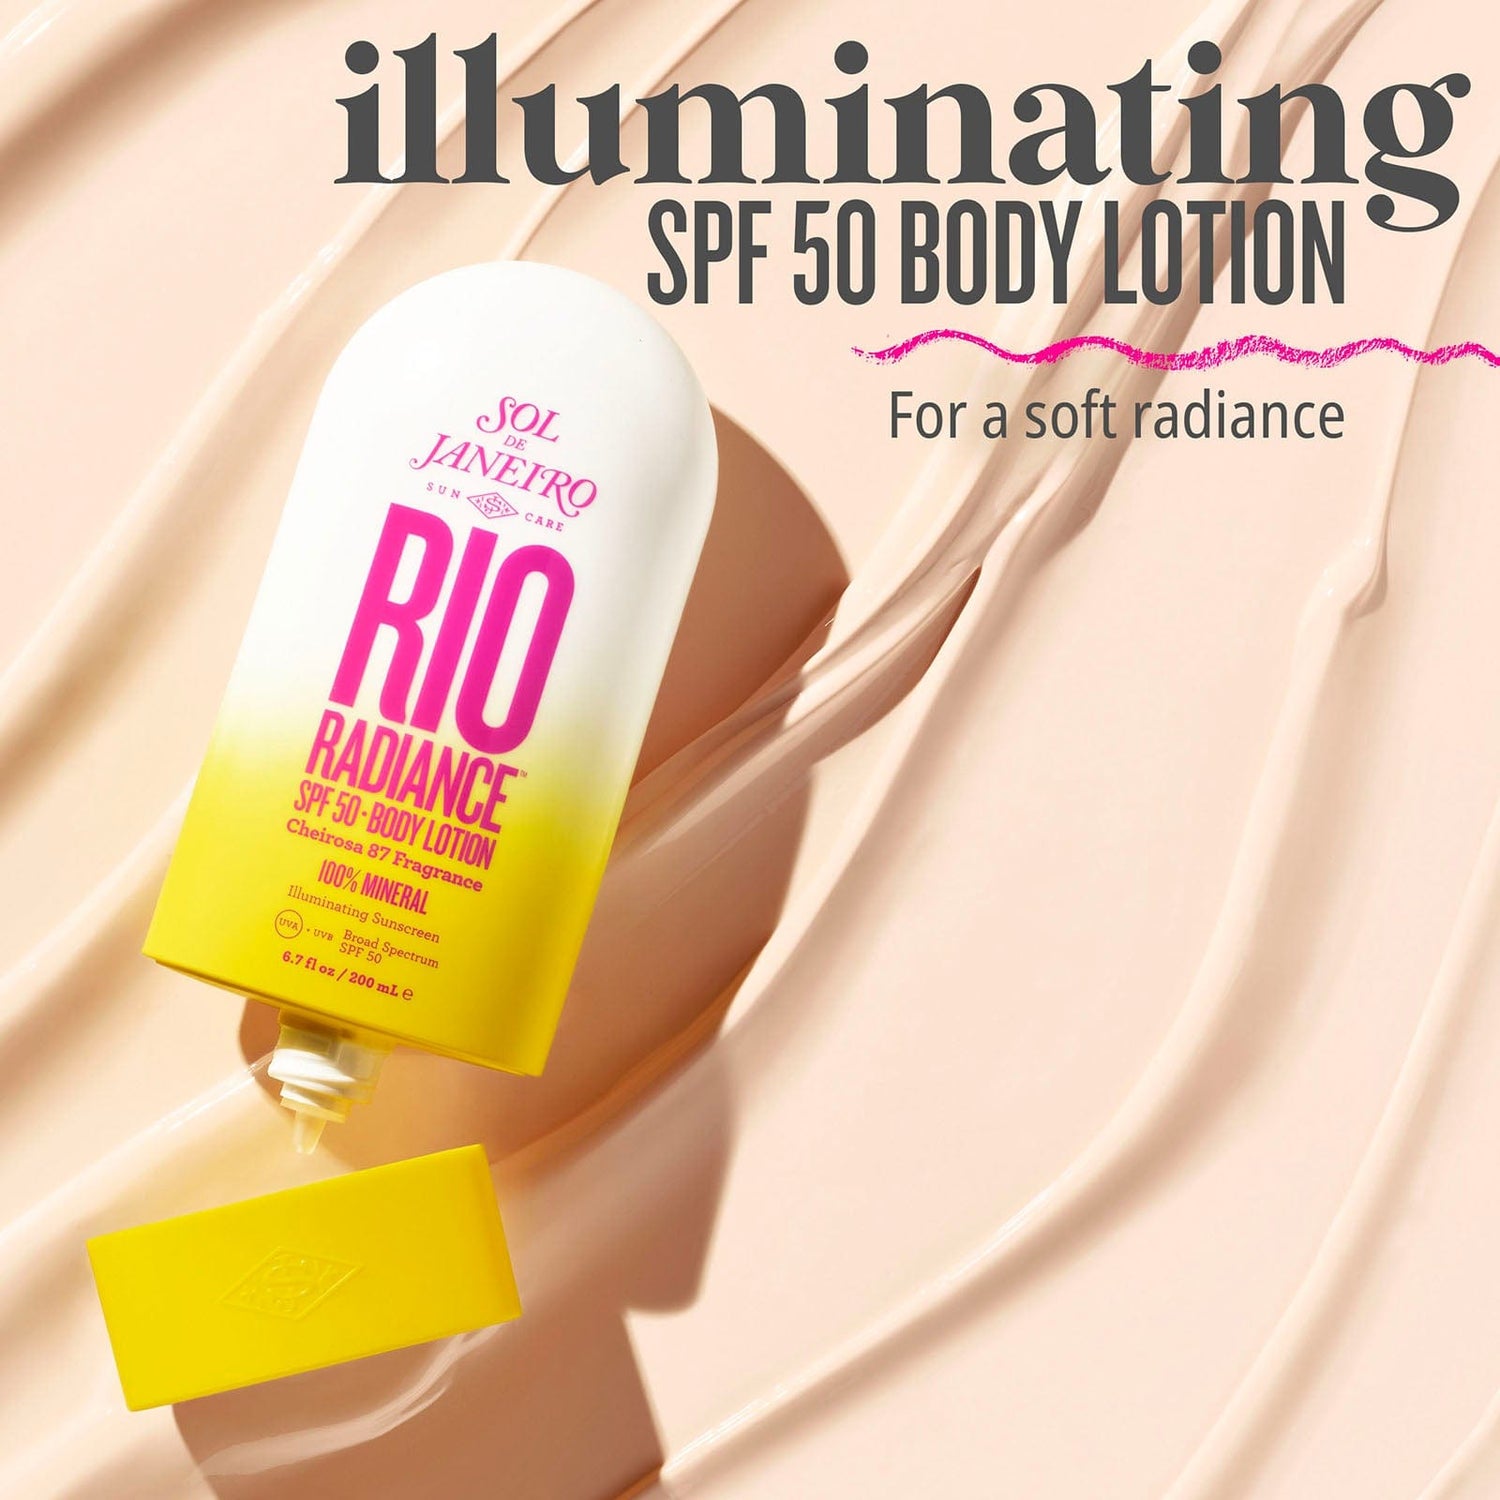 Illuminating SPF 50 body lotion for a soft radiance